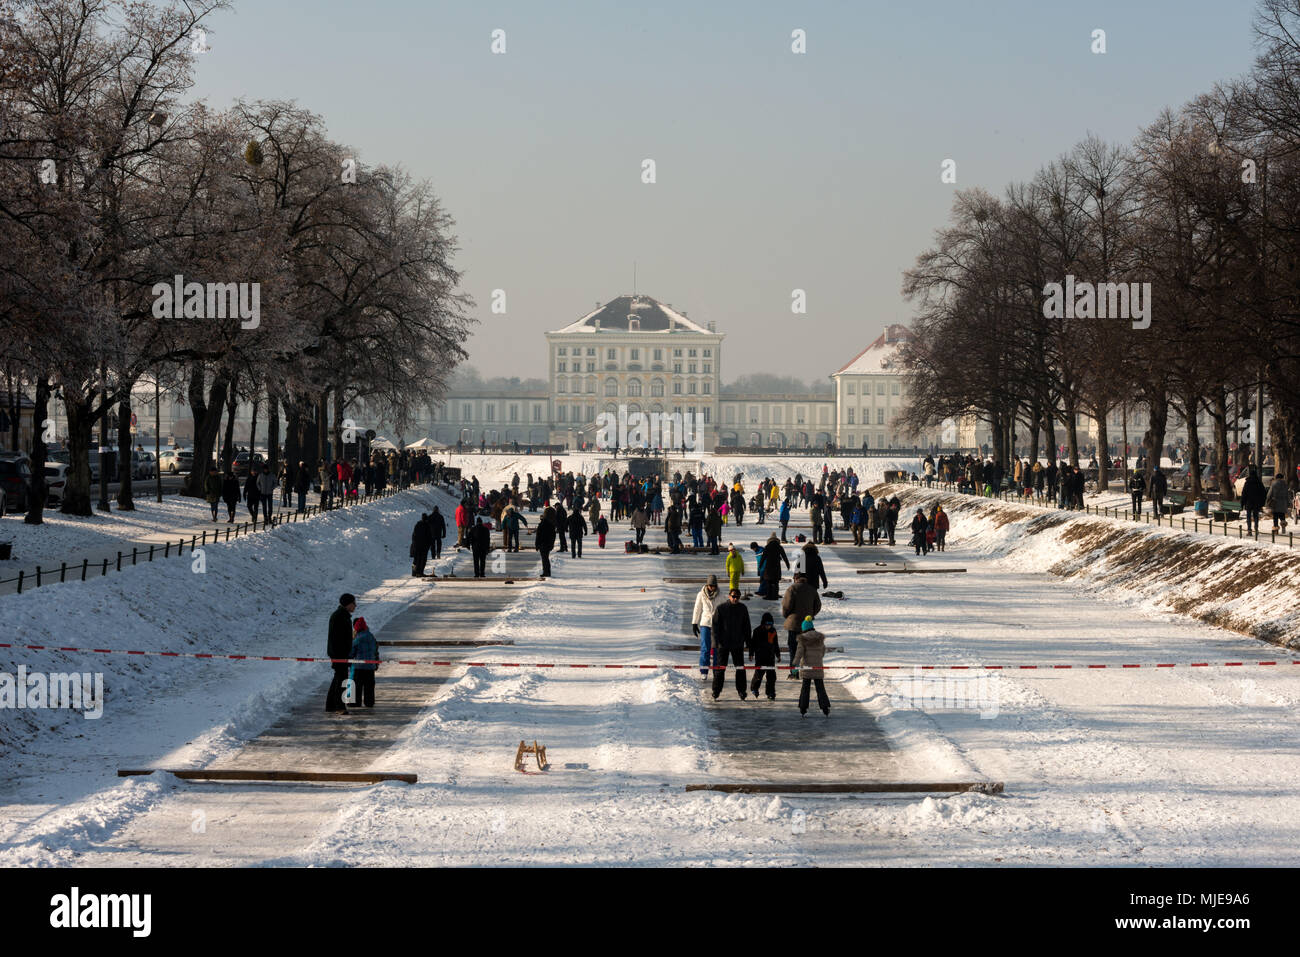 Skaters on the frozen Nymphenburger Kanal in Munich Stock Photo